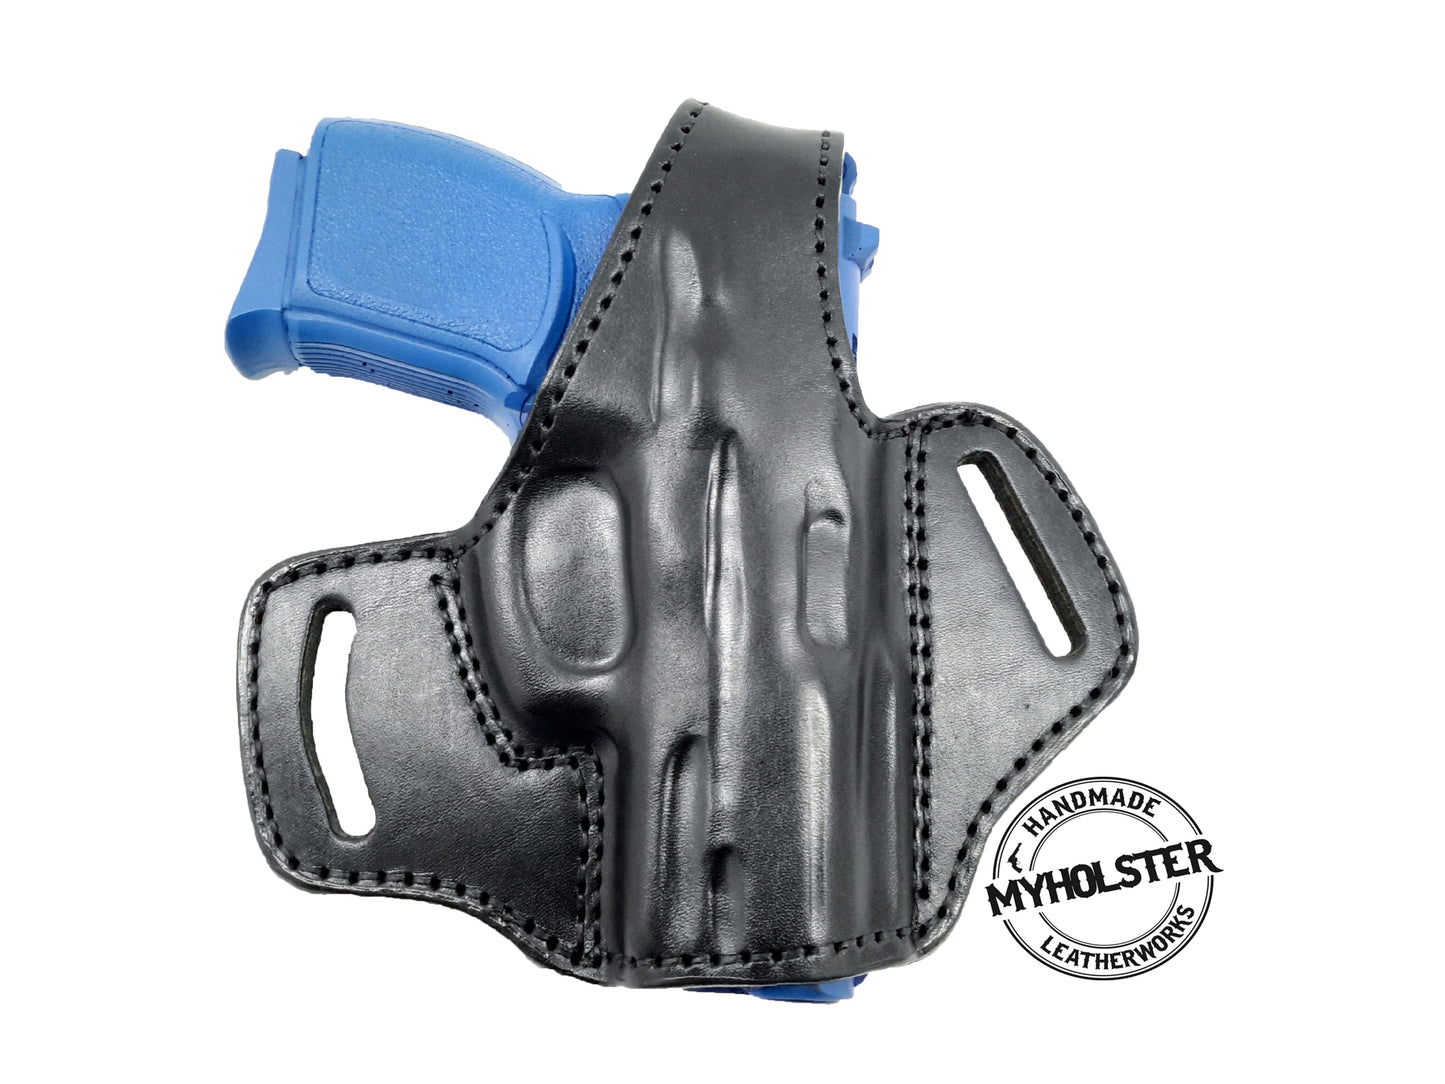 Taurus PT111 Millennium G2 OWB Thumb Break Leather Belt Holster - Choose Your Hand and Color